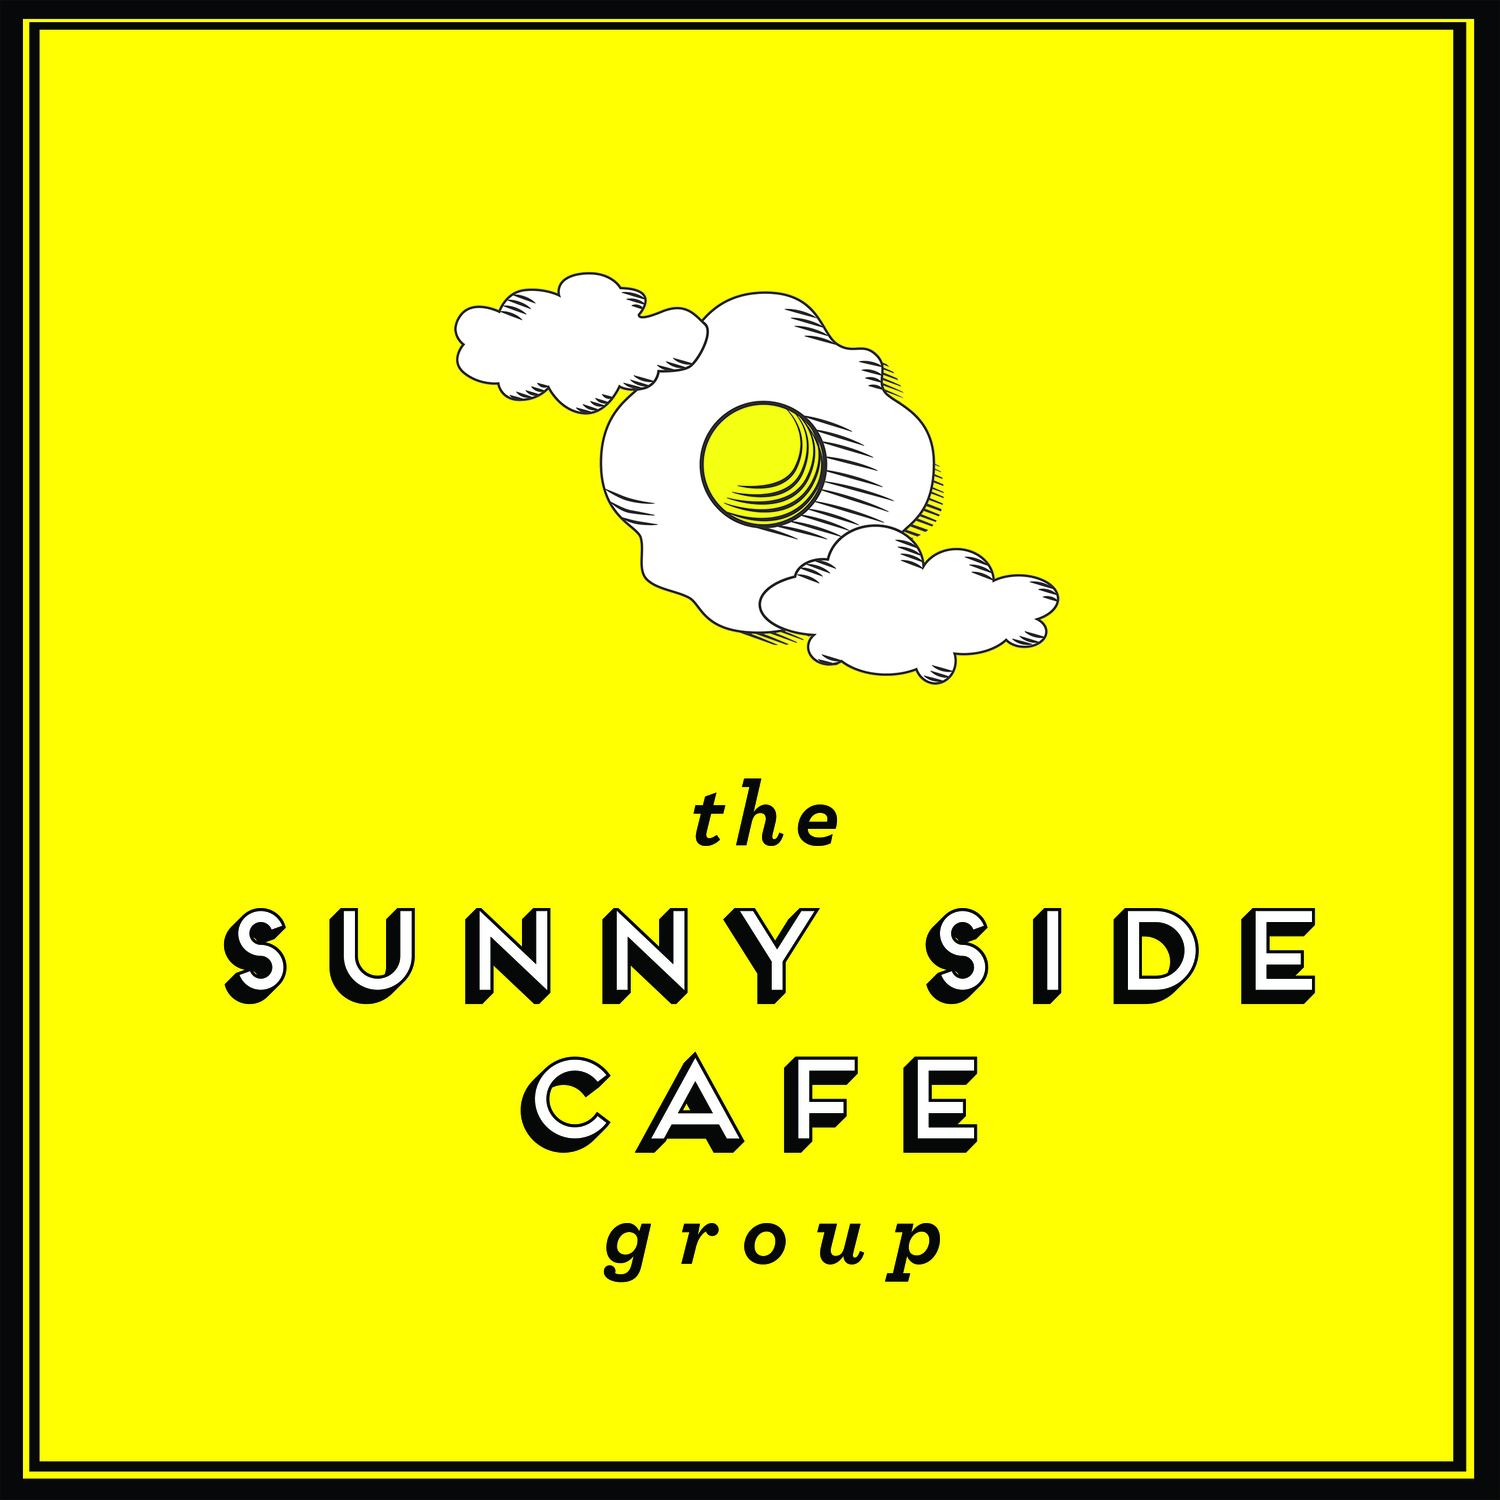 The SUNNY SIDE CAFE GROUP